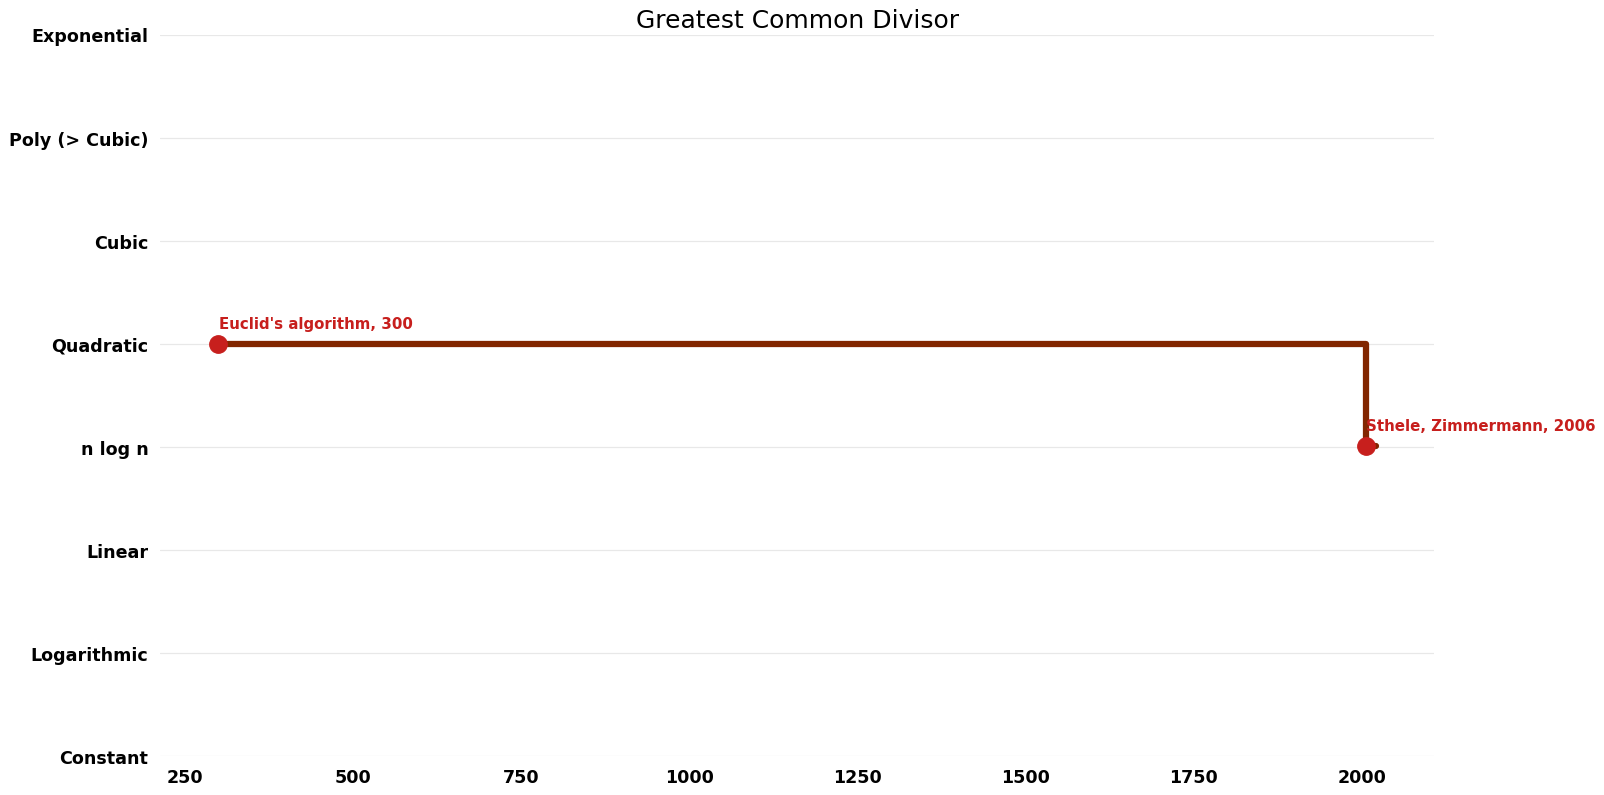 File:Greatest Common Divisor - Time.png